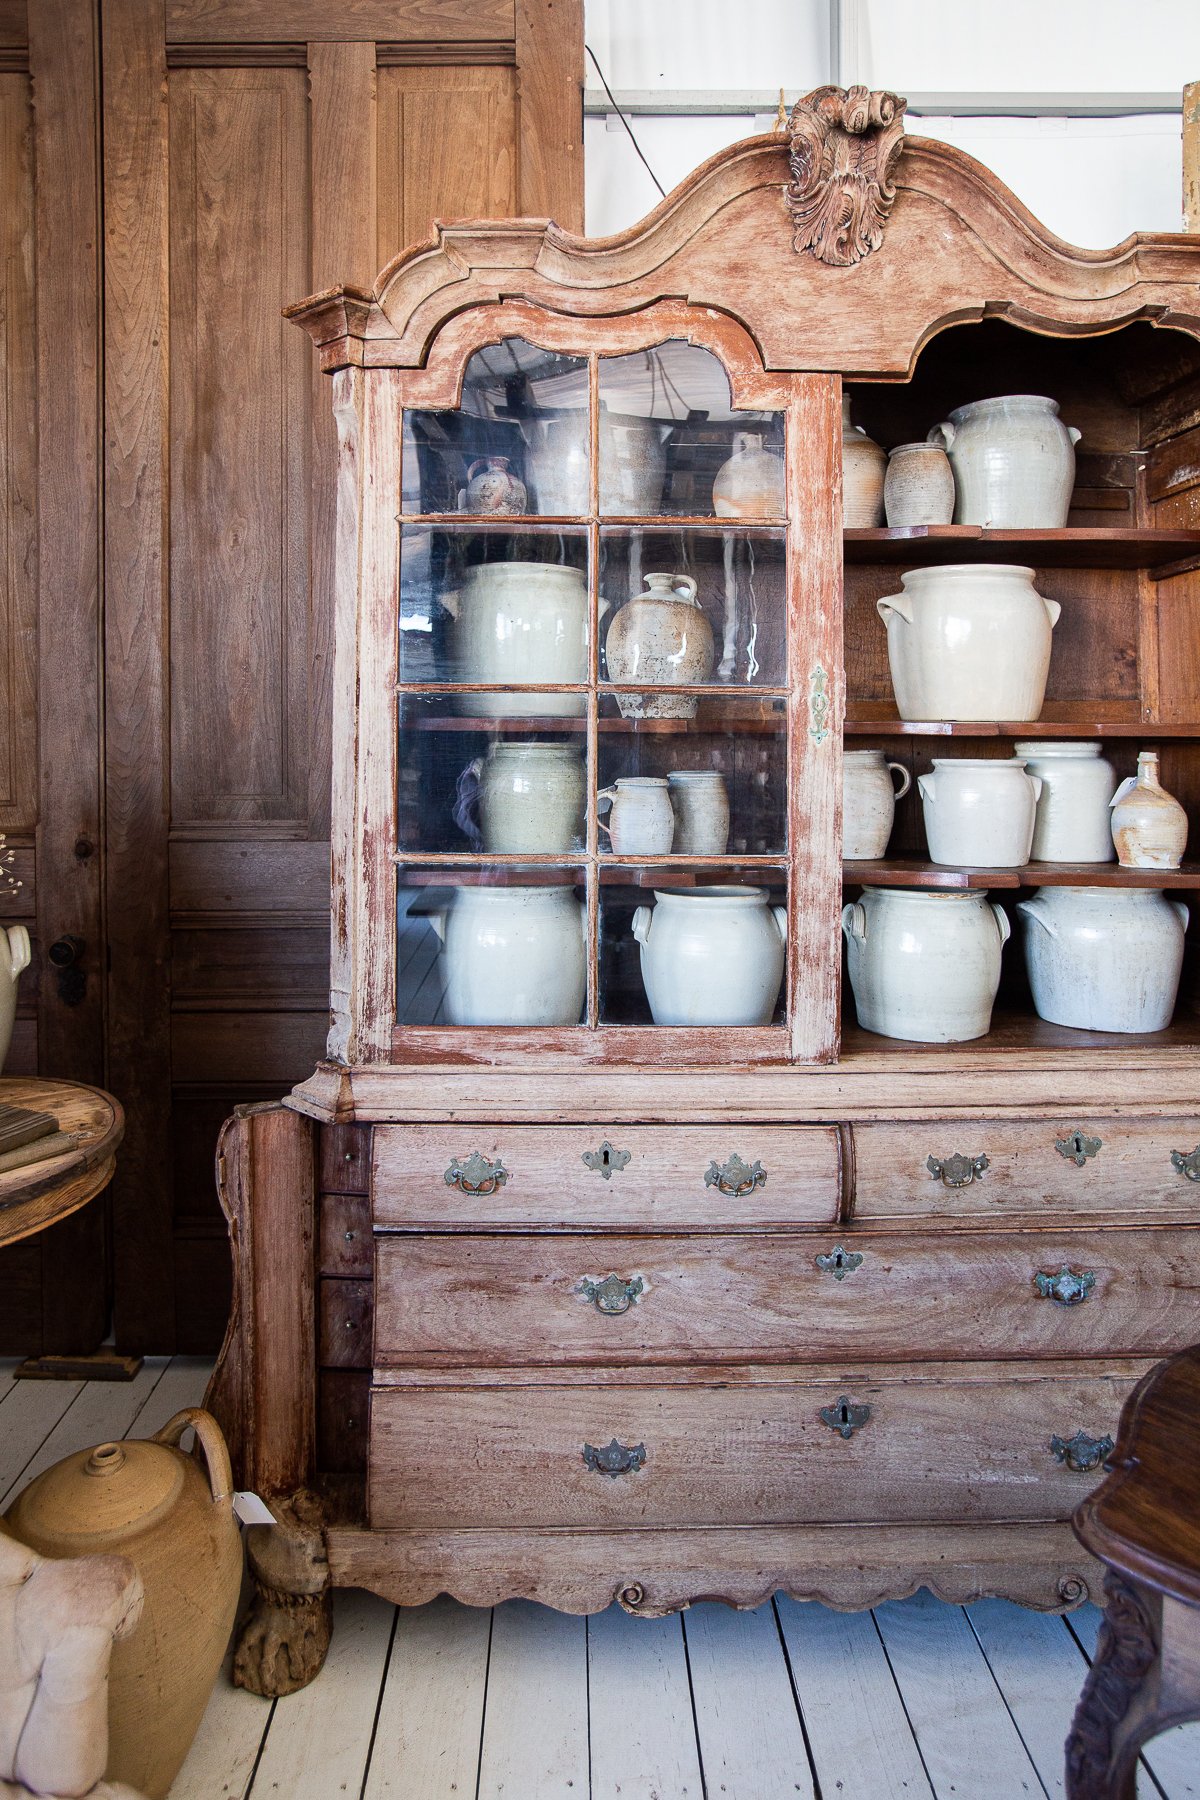 Shop European Antiques & Architectural Salvage in Round Top, Texas ...